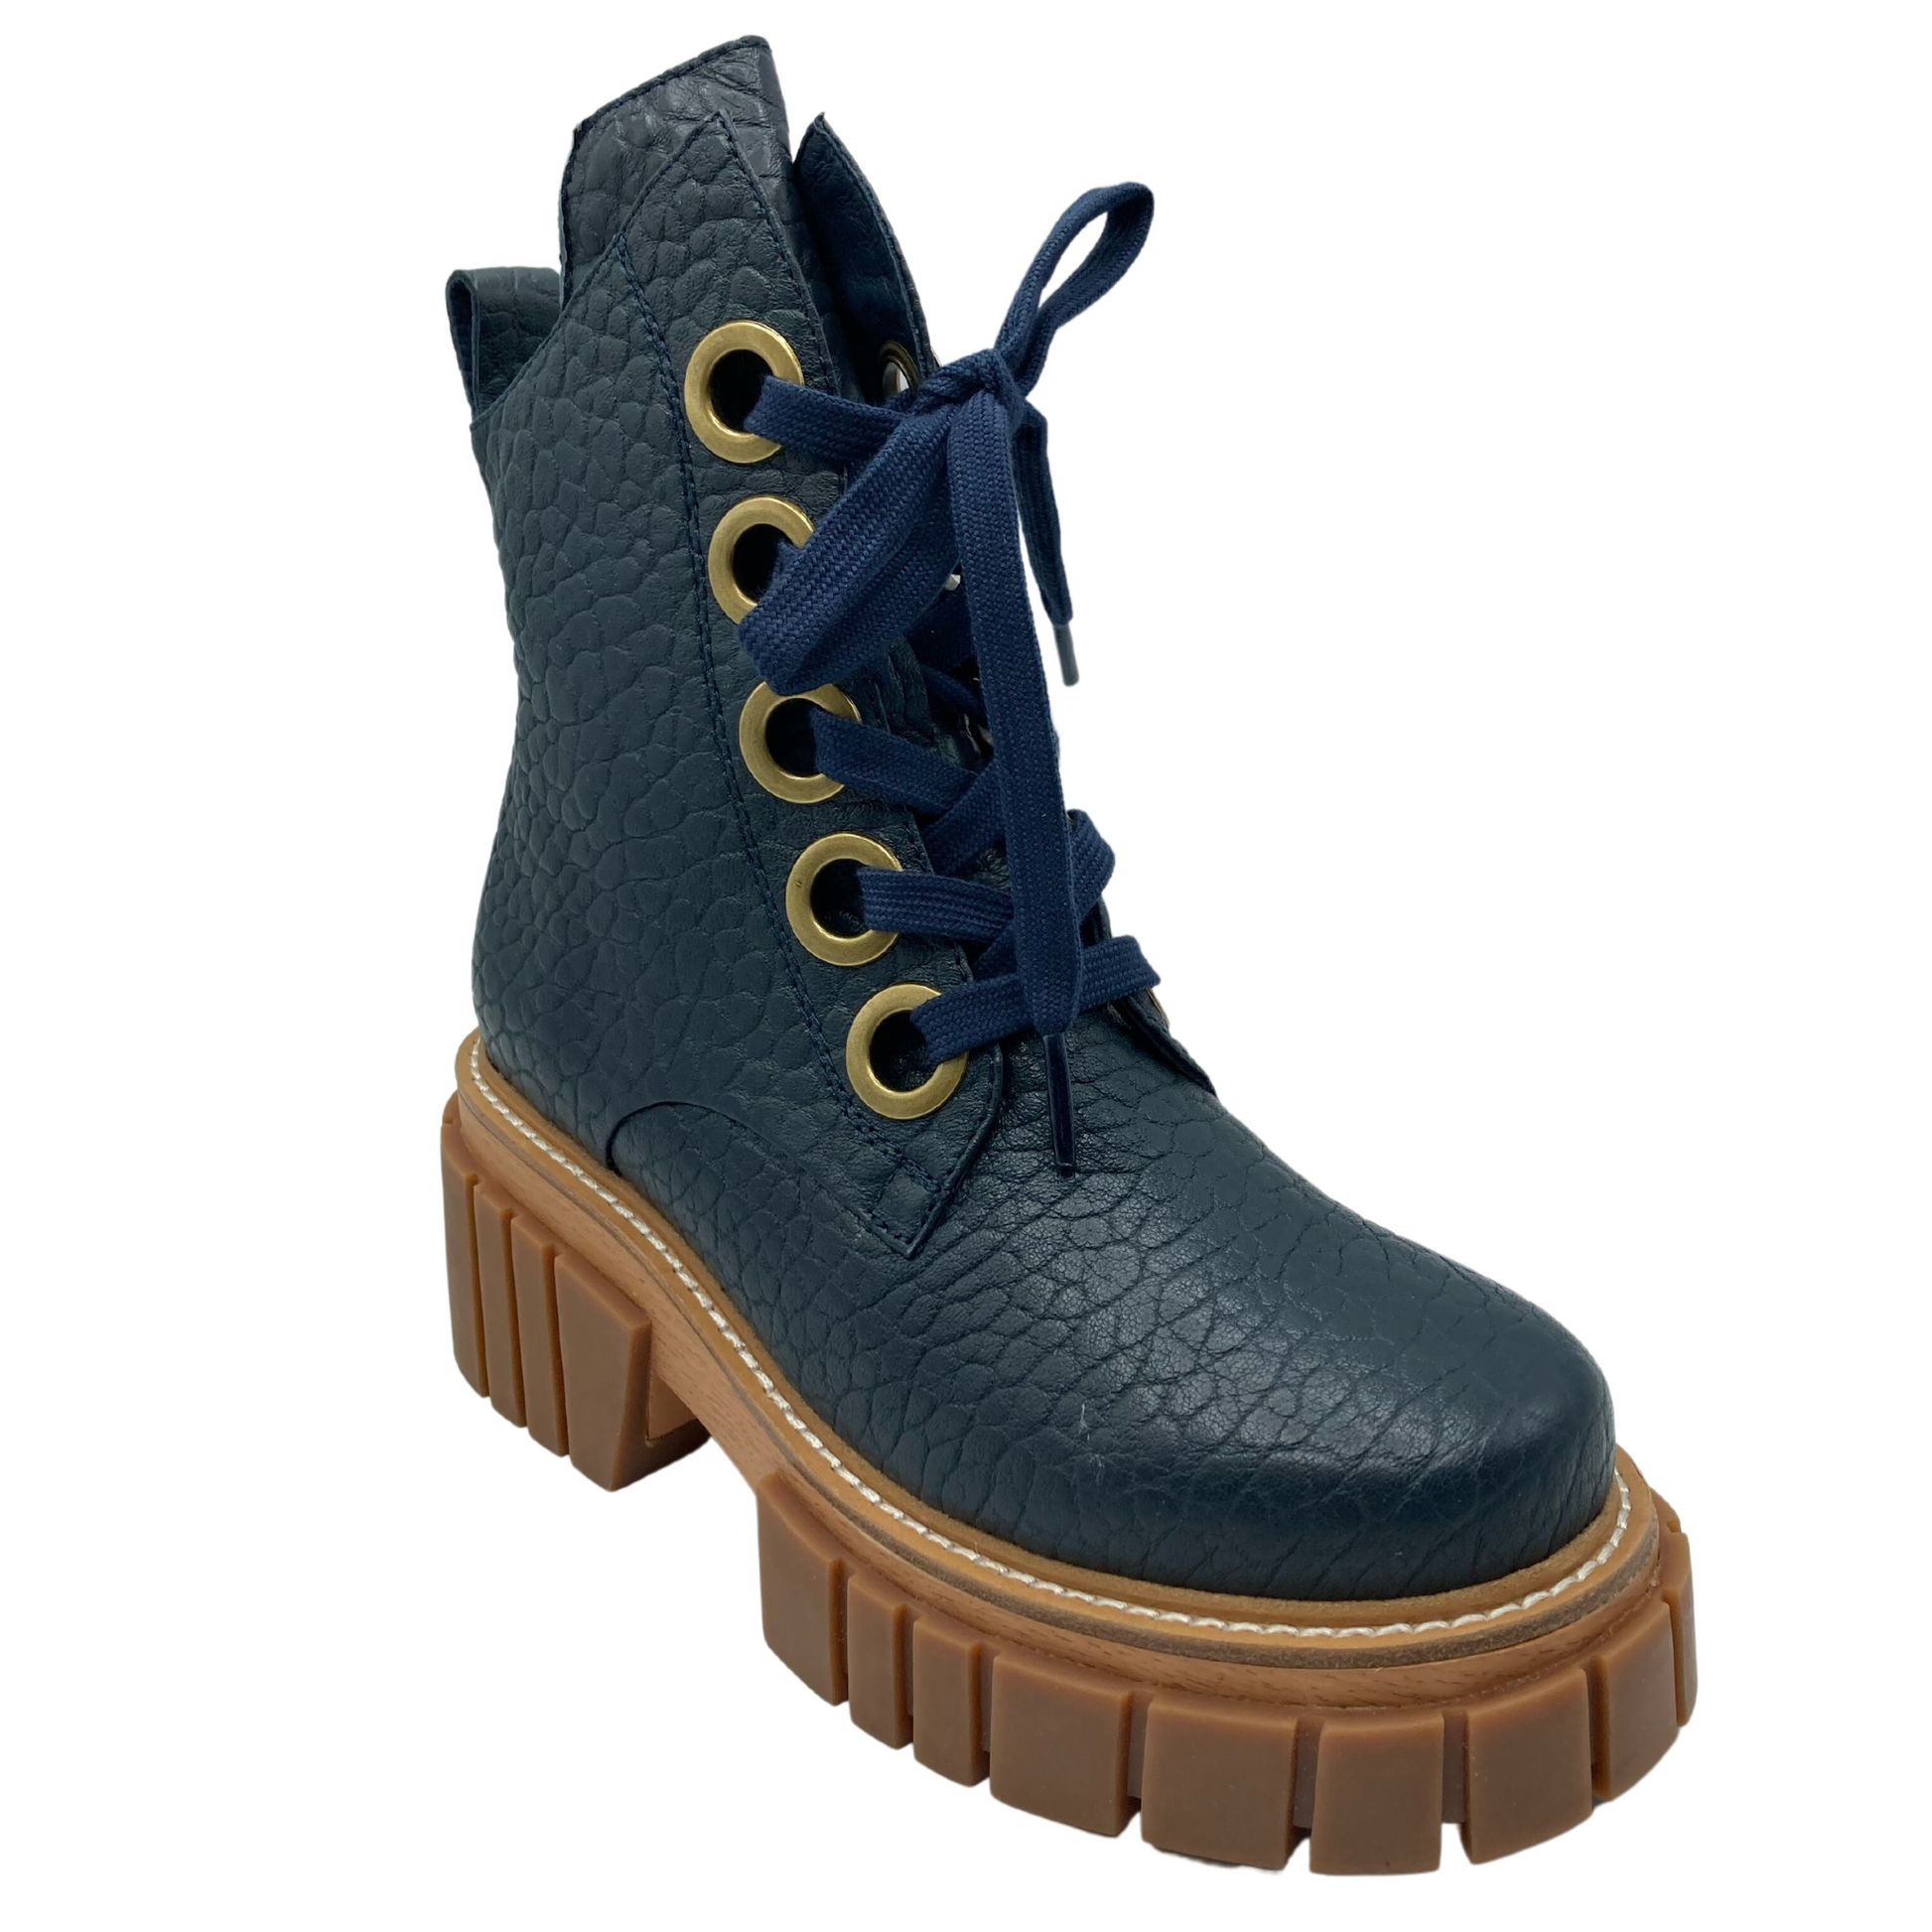 45 degree angled view of navy textured leather boot with gold eyelets, navy laces and brown rubber outsole